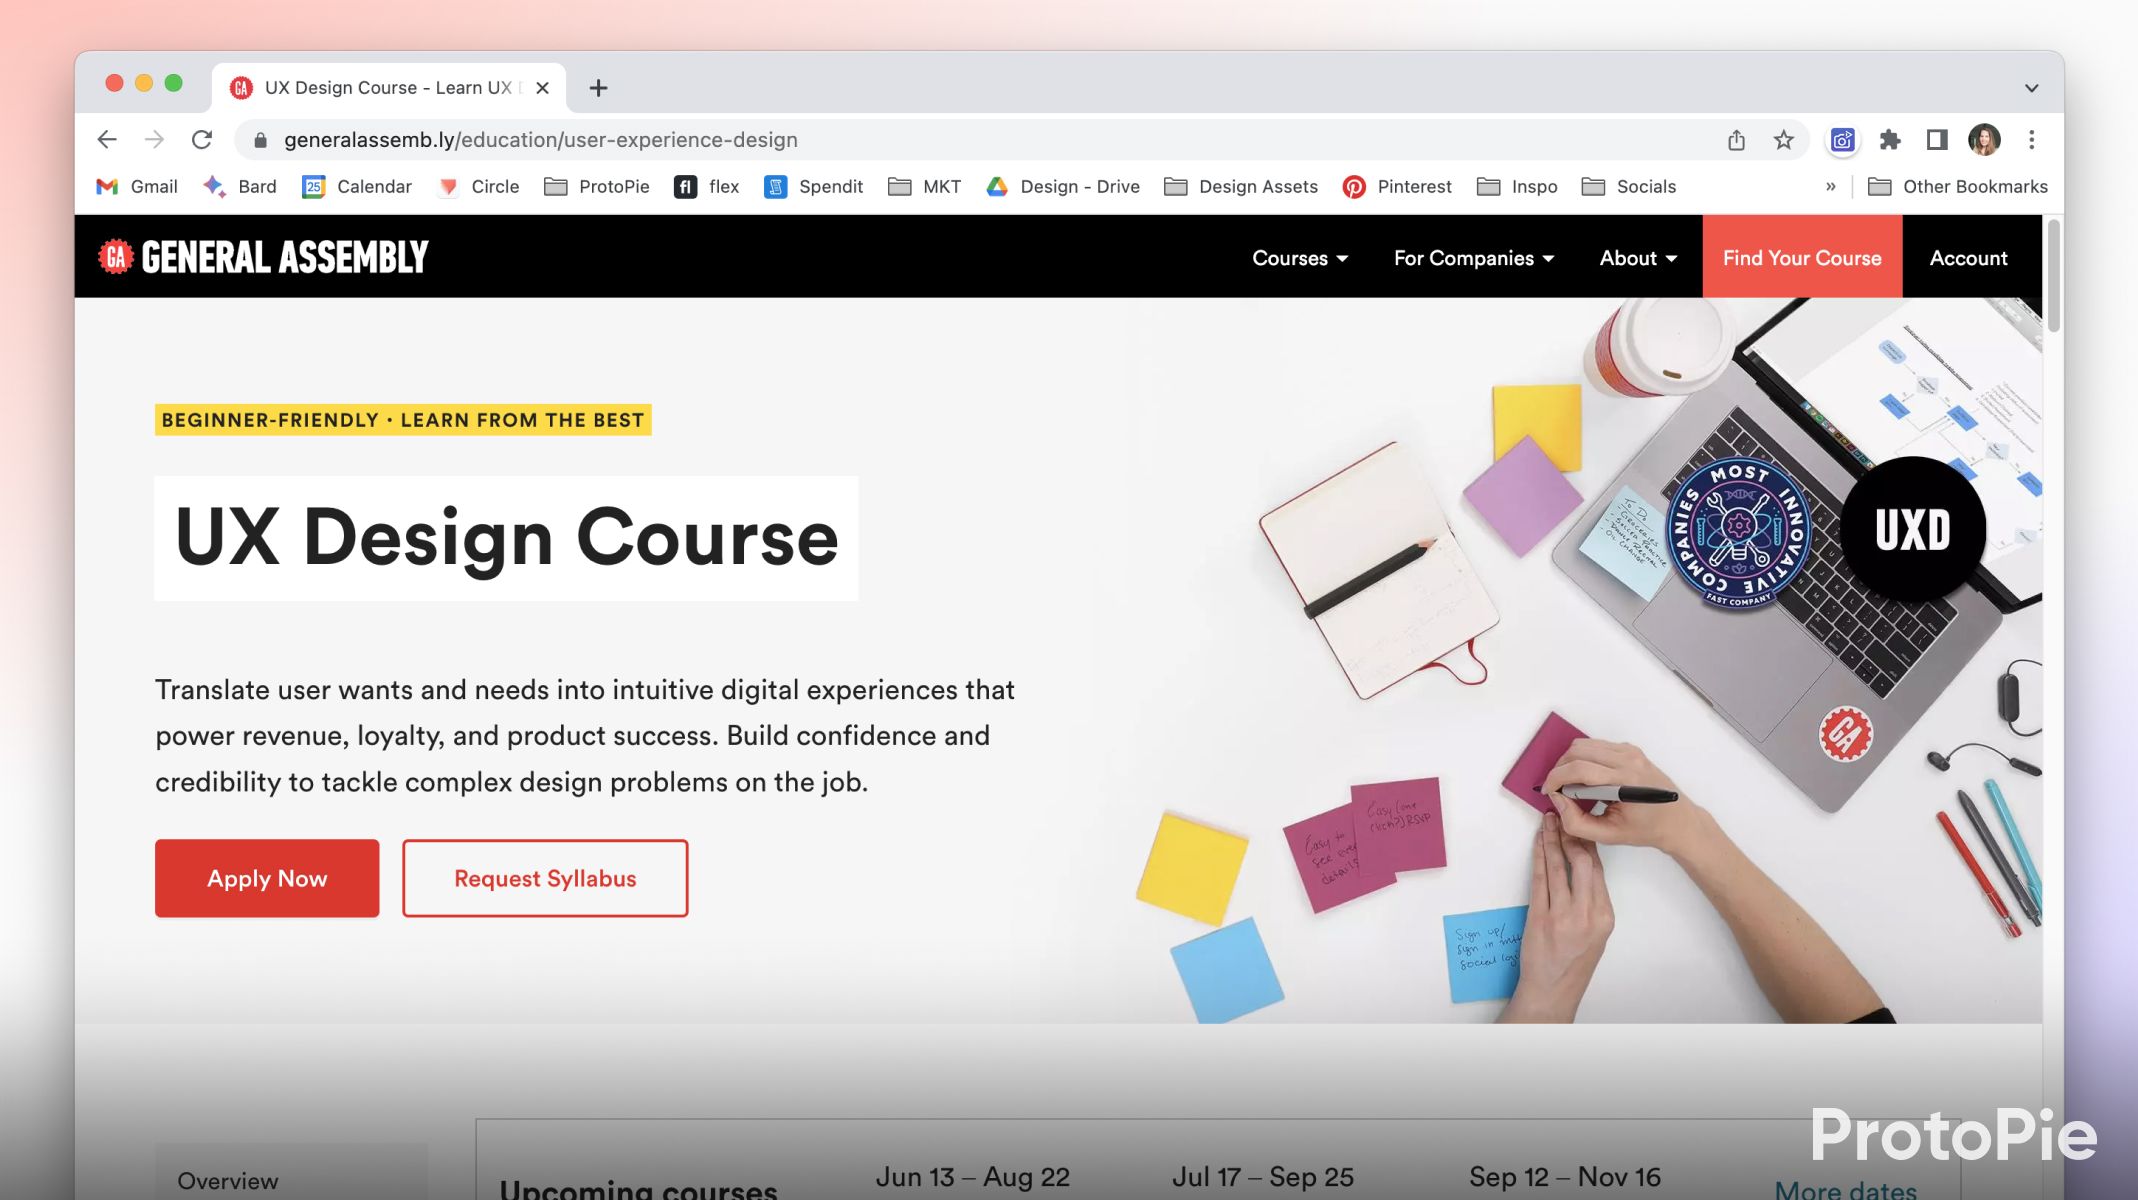 UX Design Course from General Assembly website